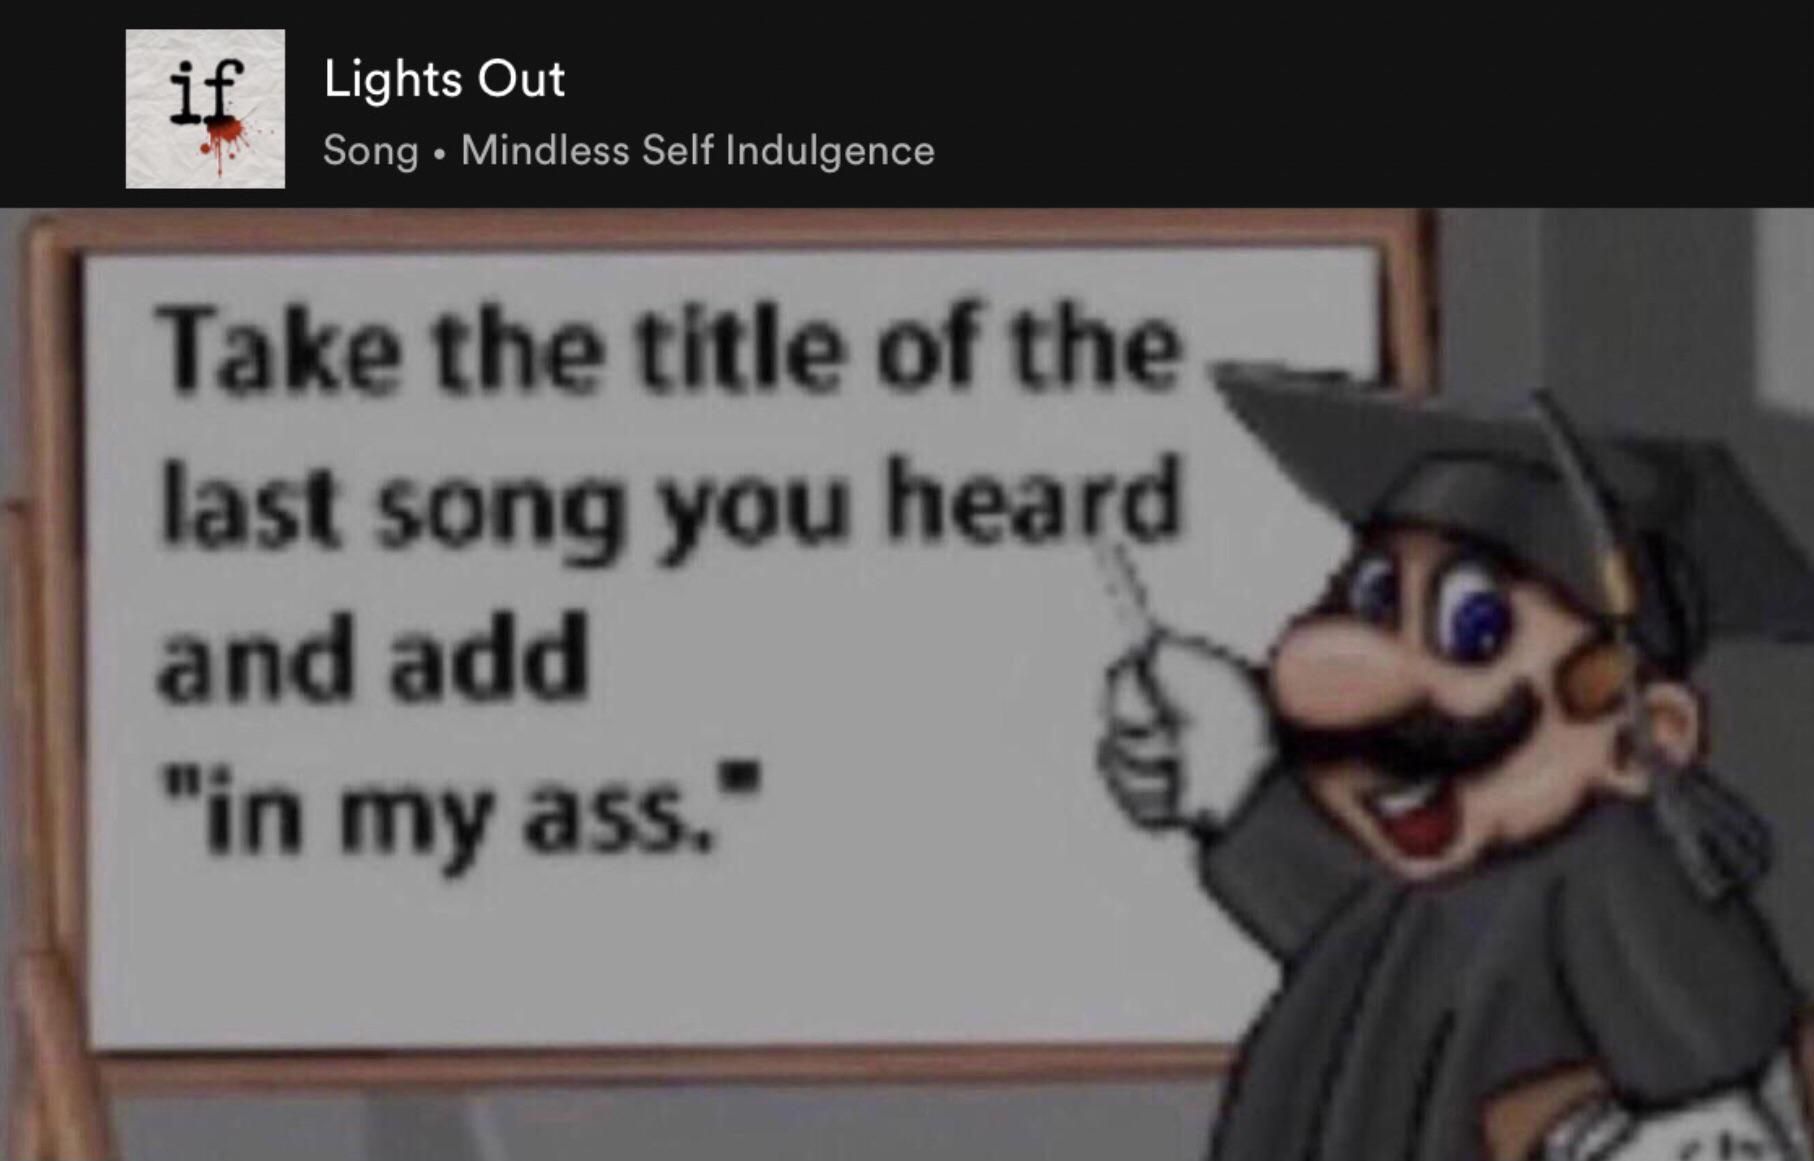 Lights out in my ass